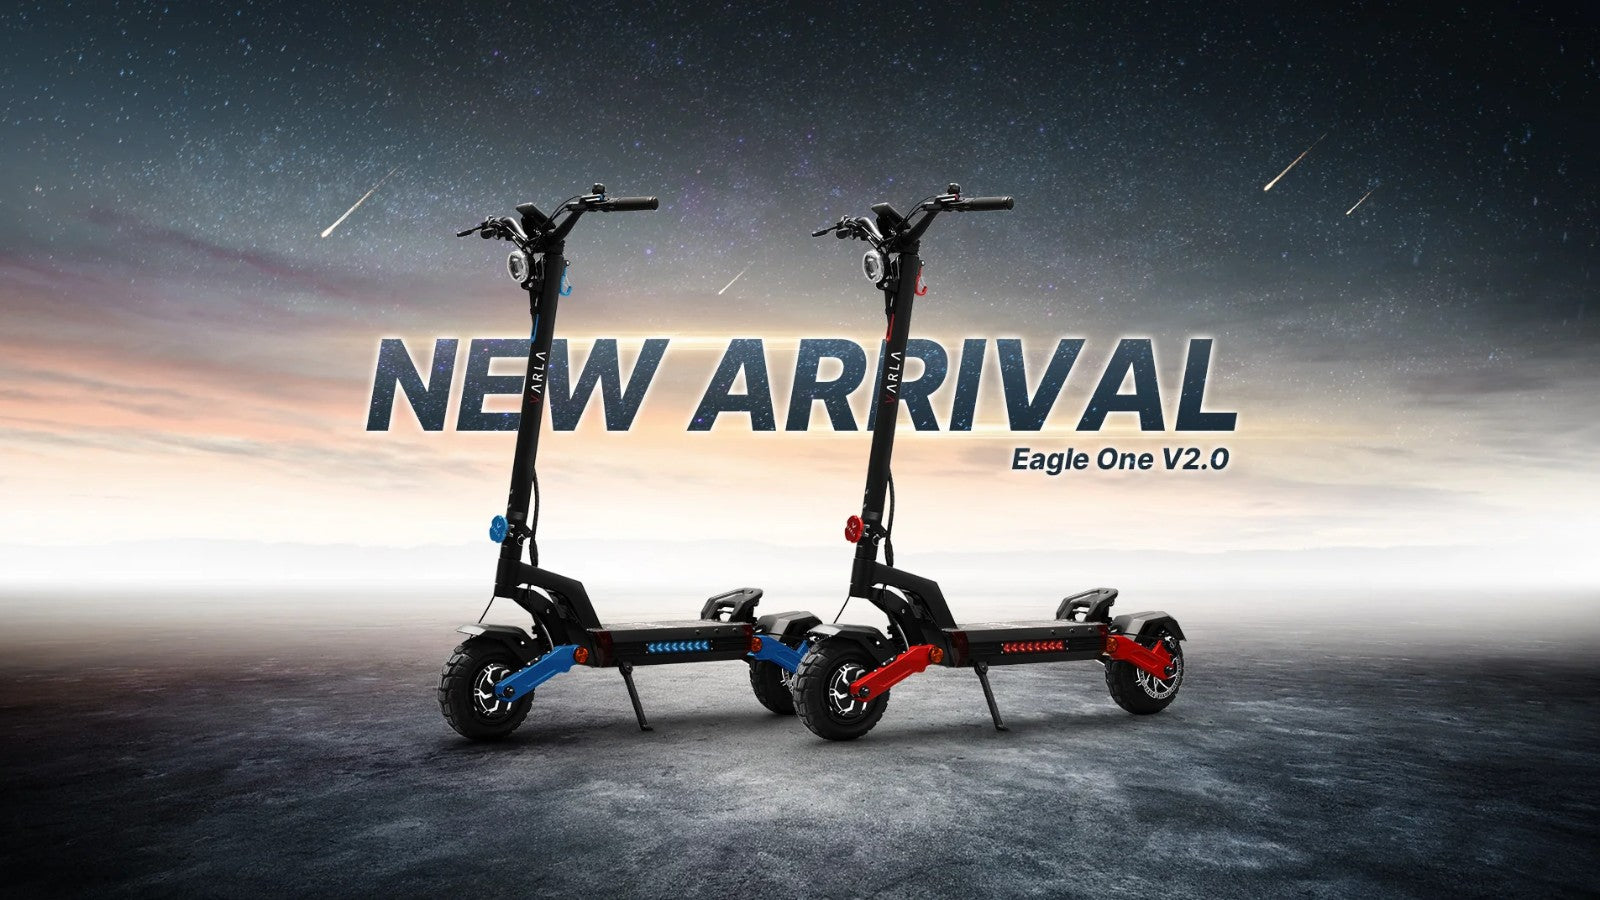 Intelligent Design Meets Unparalleled Performance: Welcome the Varla Eagle One V2.0